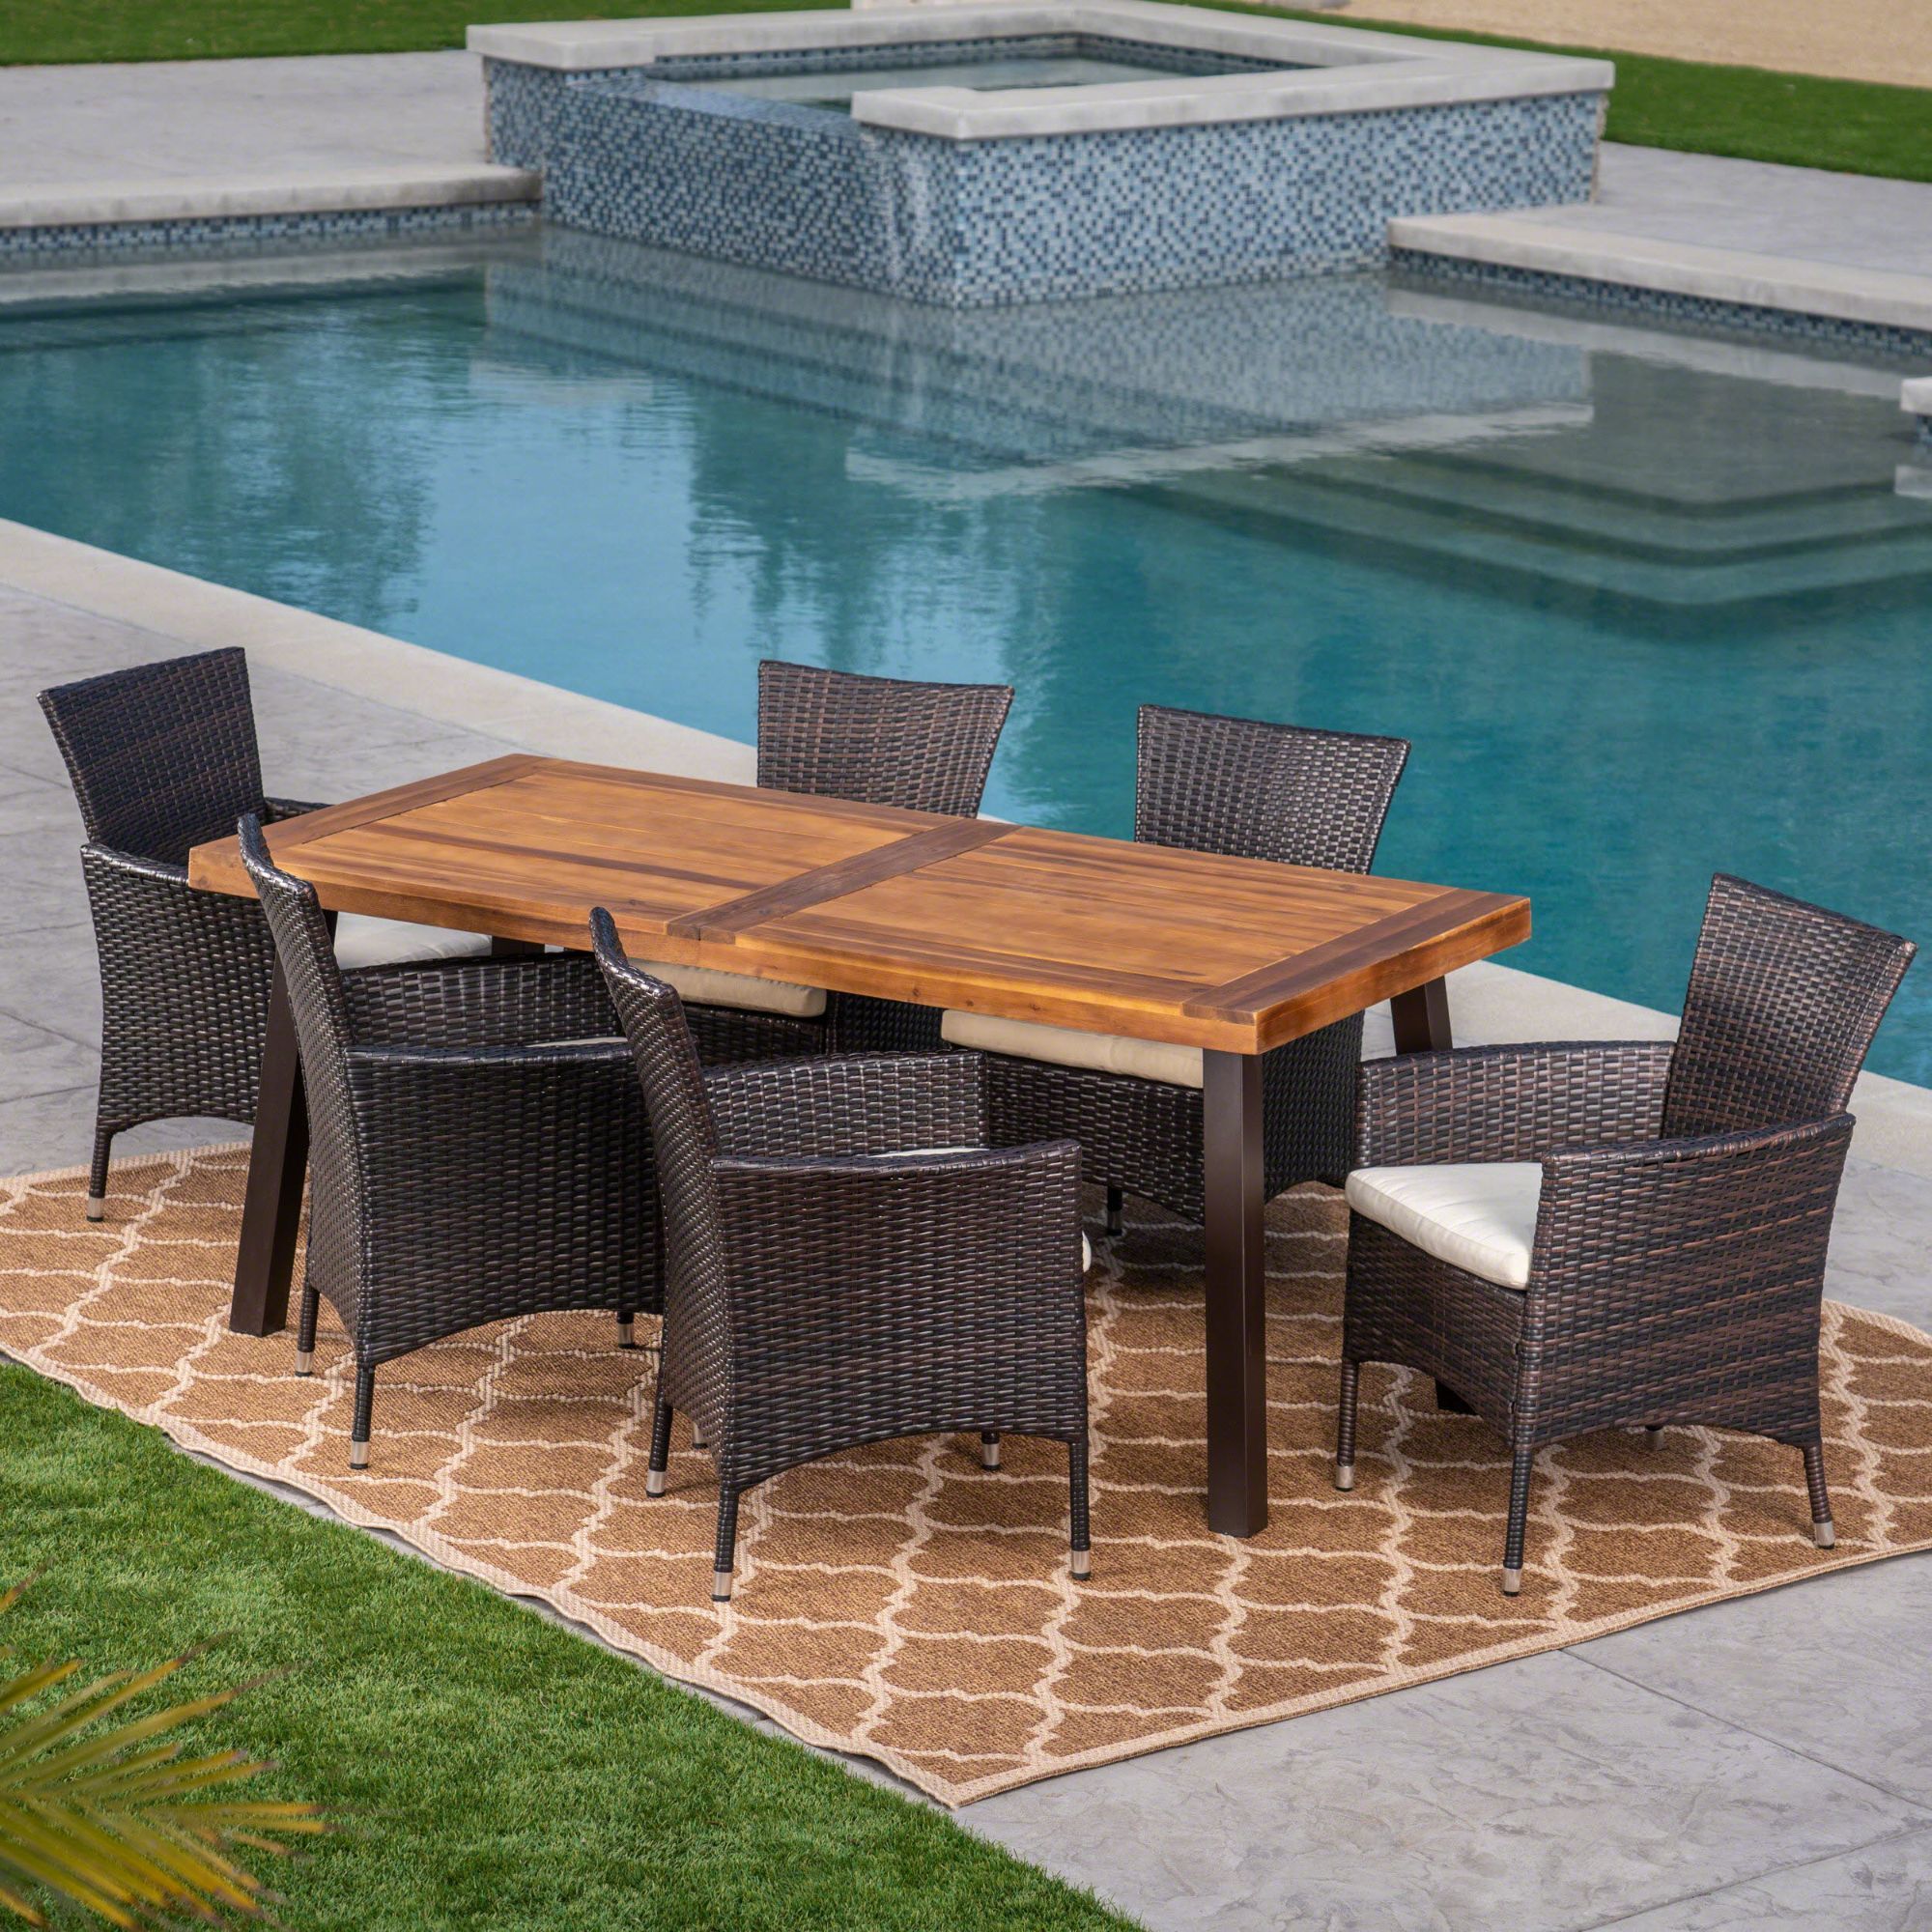 7 Piece Brown Contemporary Wicker Outdoor Furniture Patio Dining Set With Regard To Patio Dining Sets With Cushions (View 11 of 15)